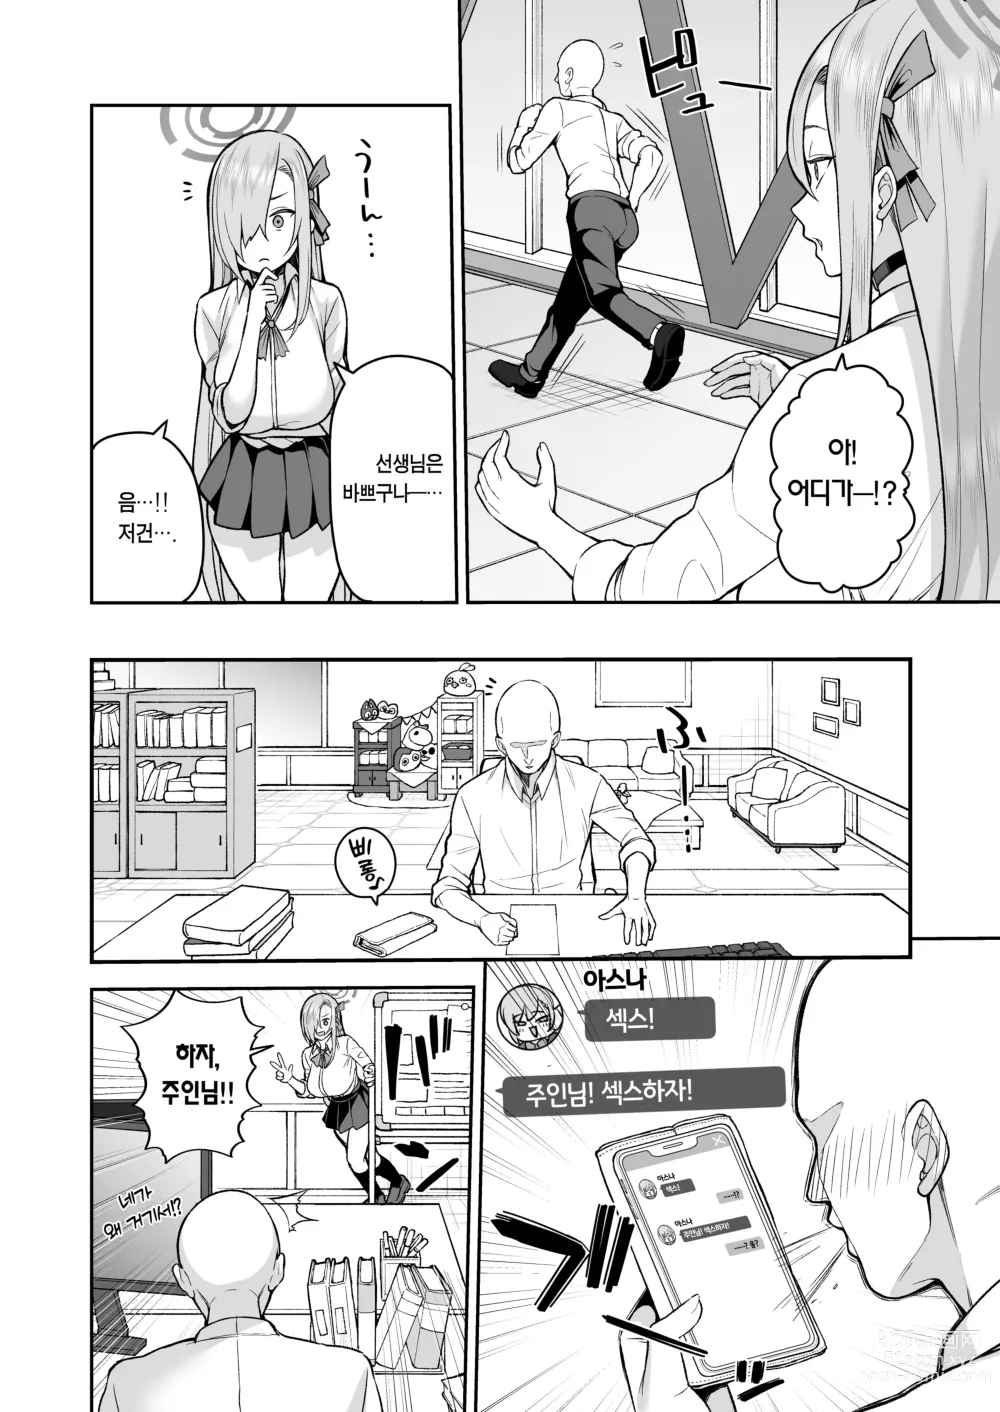 Page 4 of doujinshi 알려줘